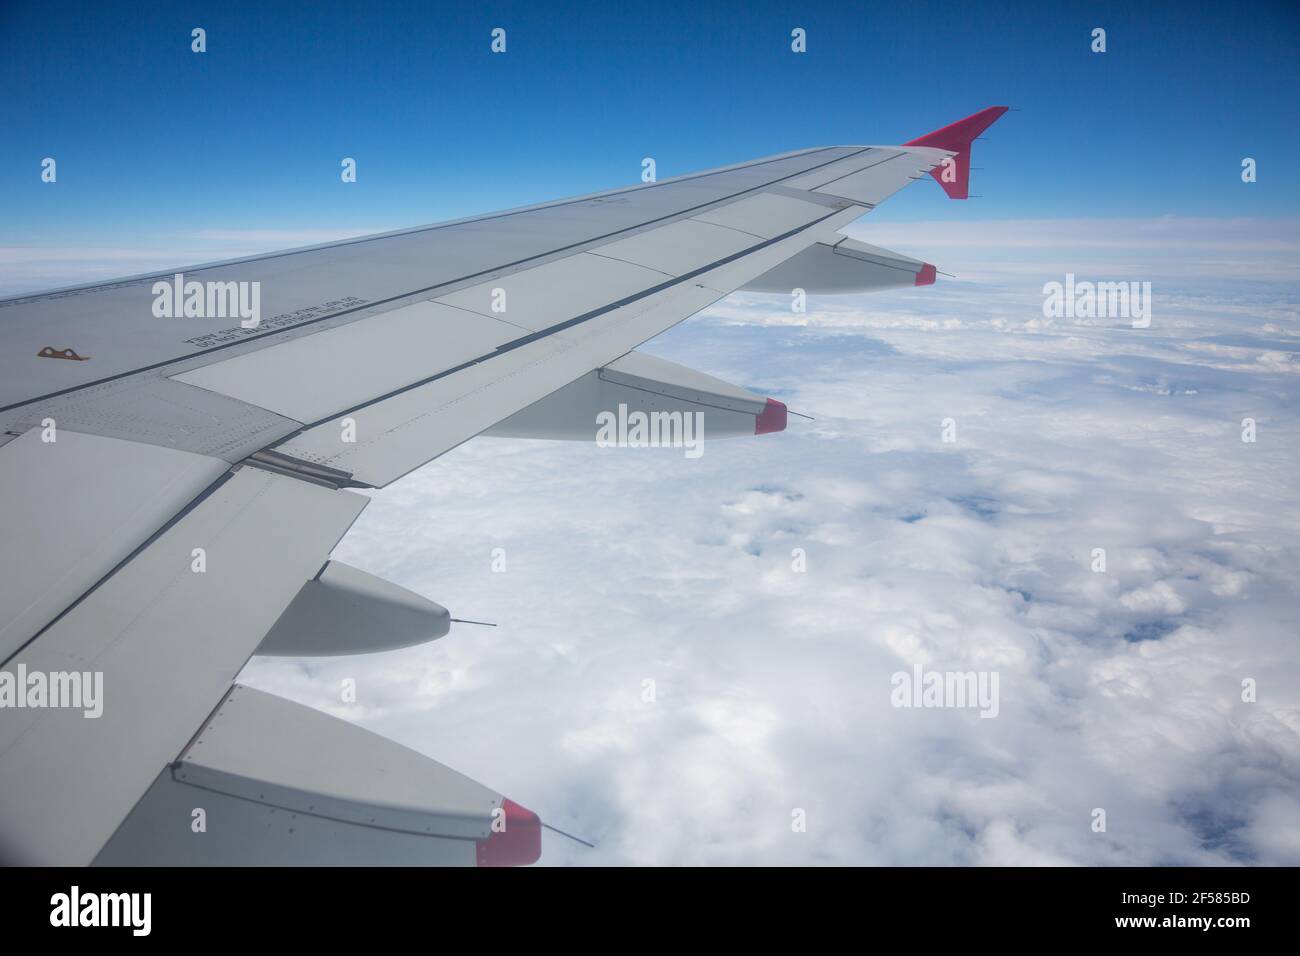 Of The Wing Of A Jet Aircraft Above The Clouds, Horizontal Stock Photo